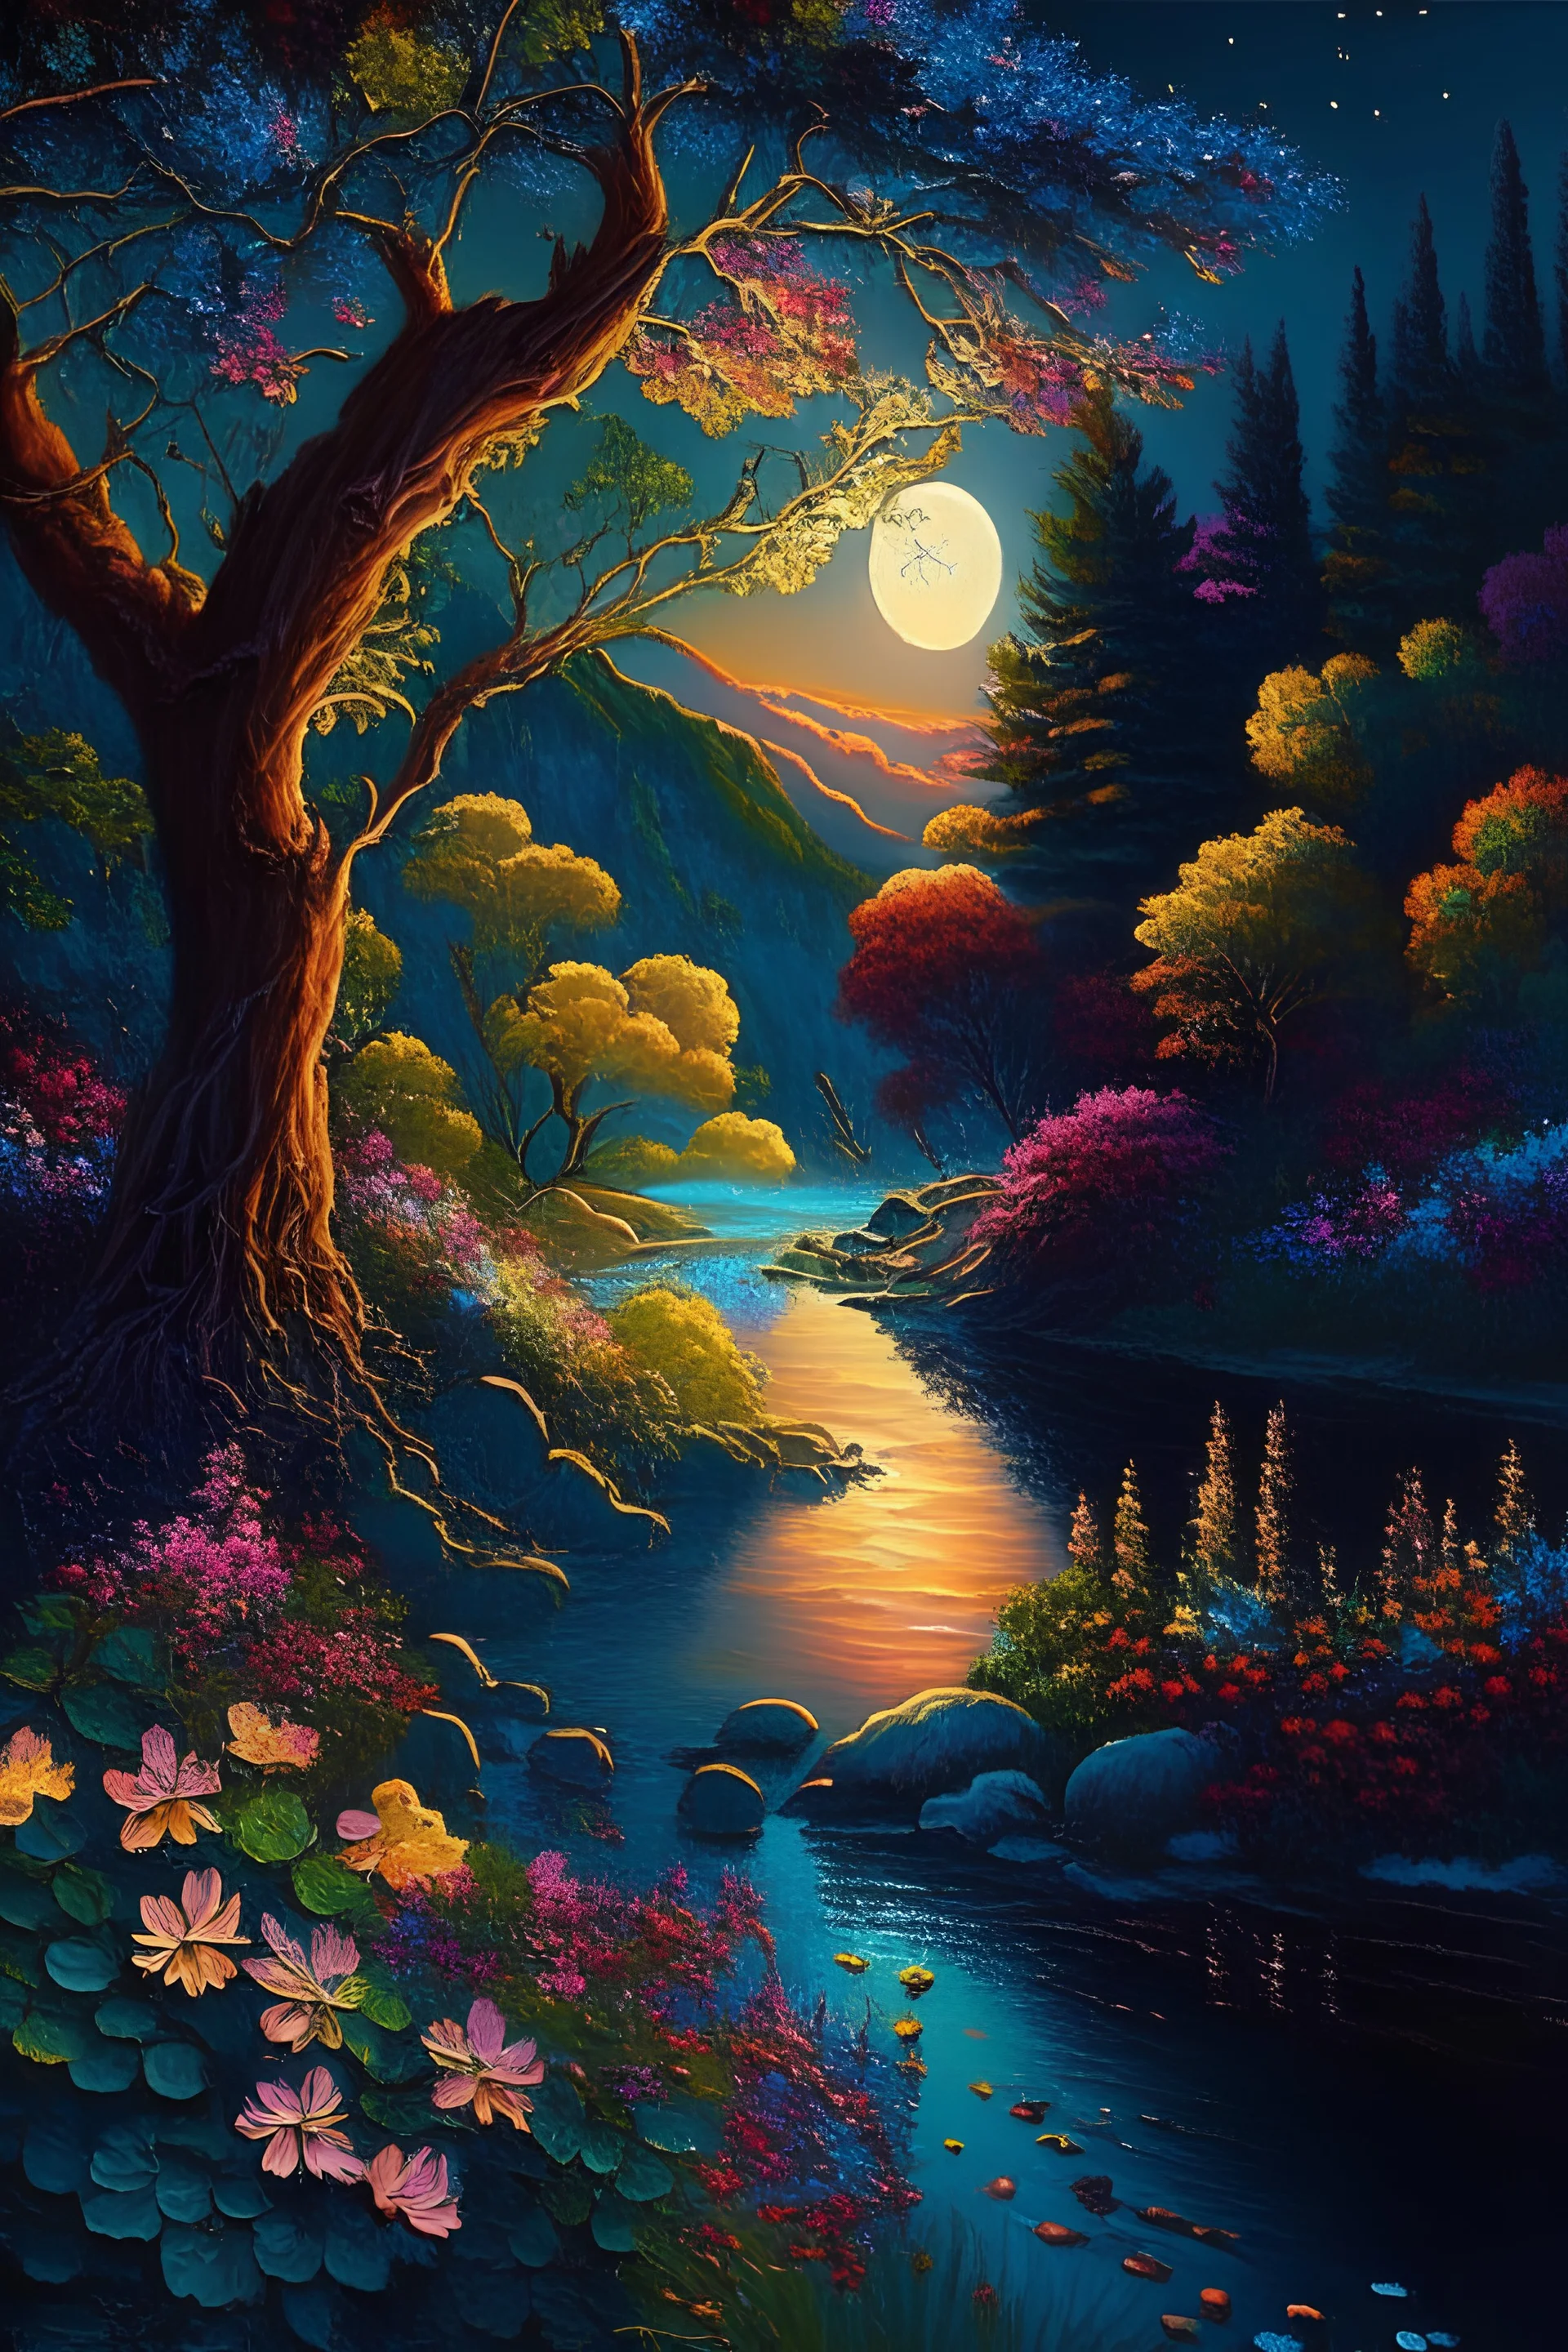 full light,highlight, trees, river, day, sun day, an idyliic forest with bright colorful flowers, mountains, sun,flower, a small river, paradise, heavenly atmosphere in the moonlit night, detailed painting, deep color, fantastucal, intricate details